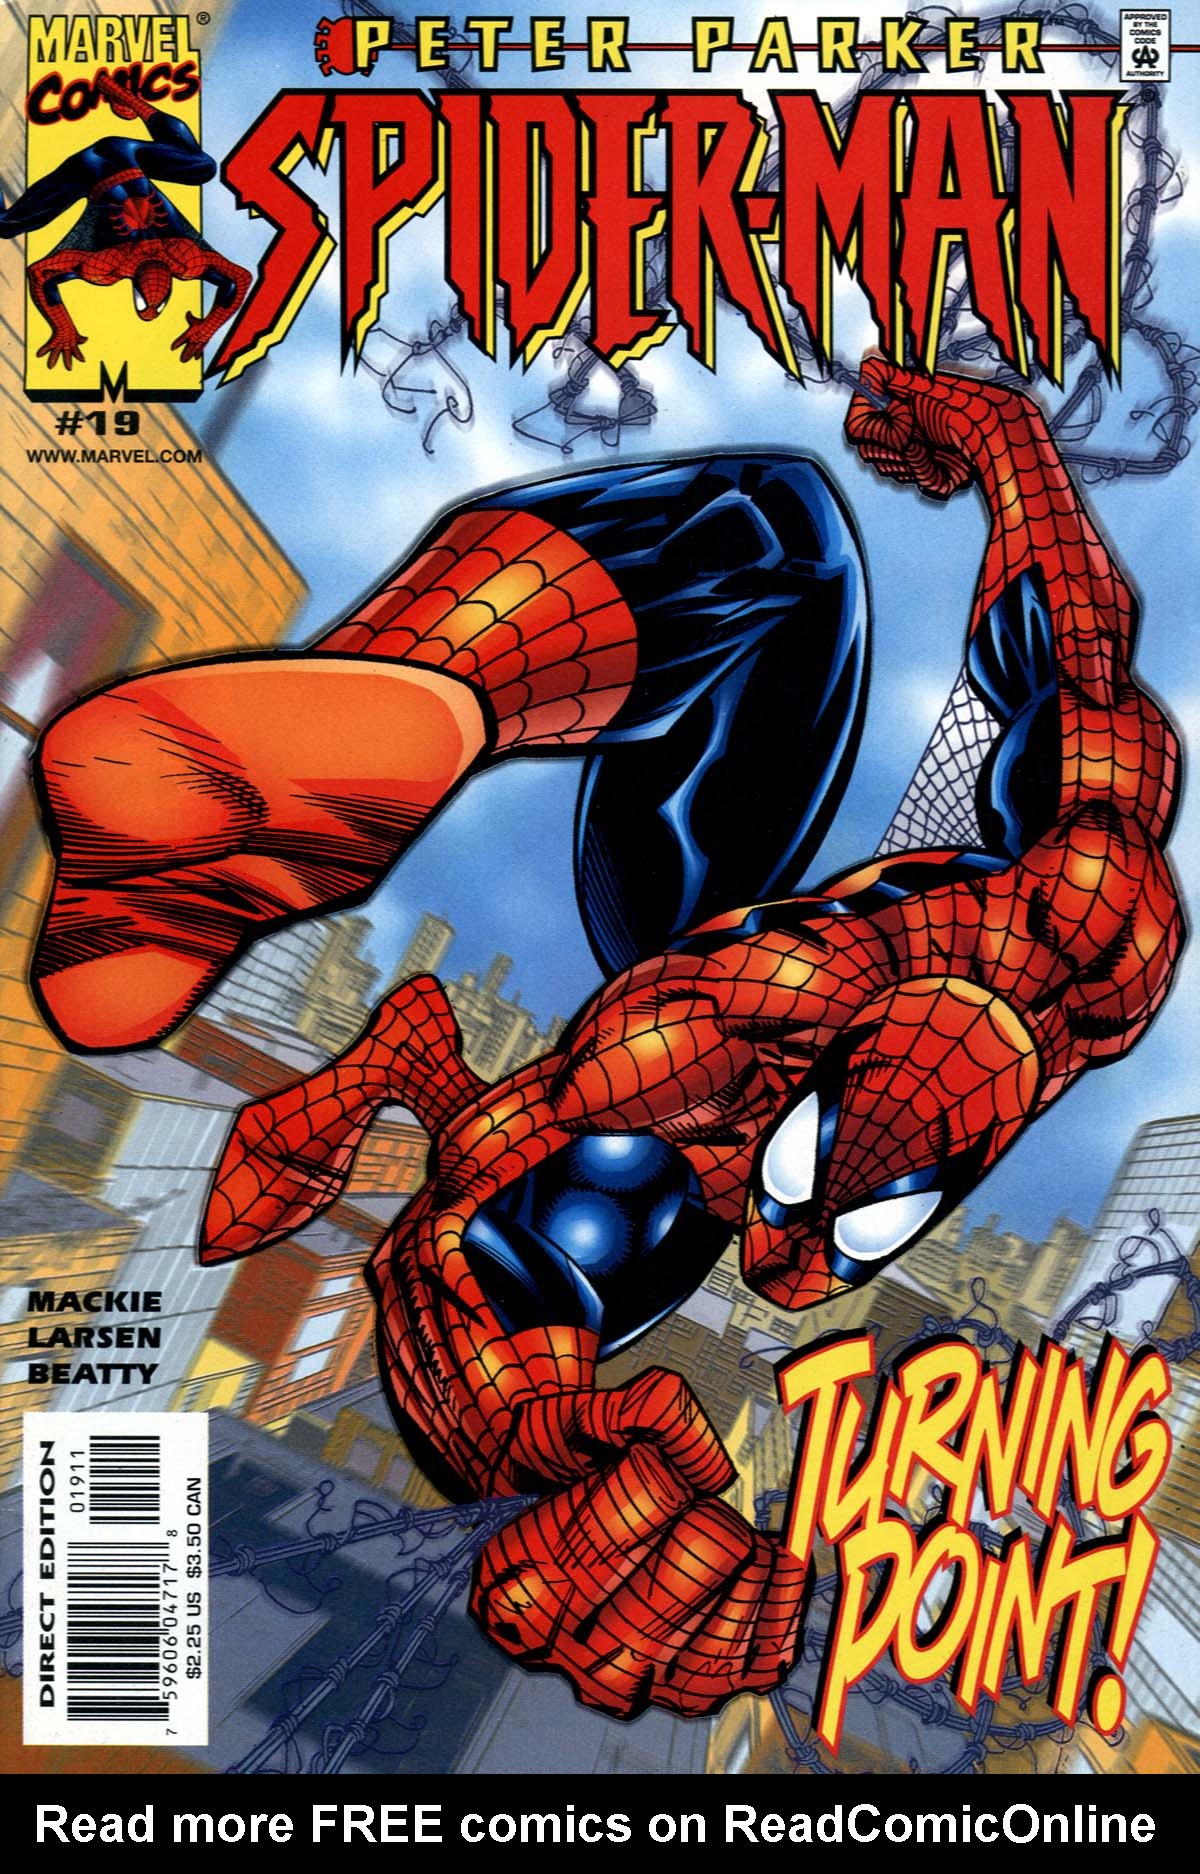 Read online Peter Parker: Spider-Man comic -  Issue #19 - 1